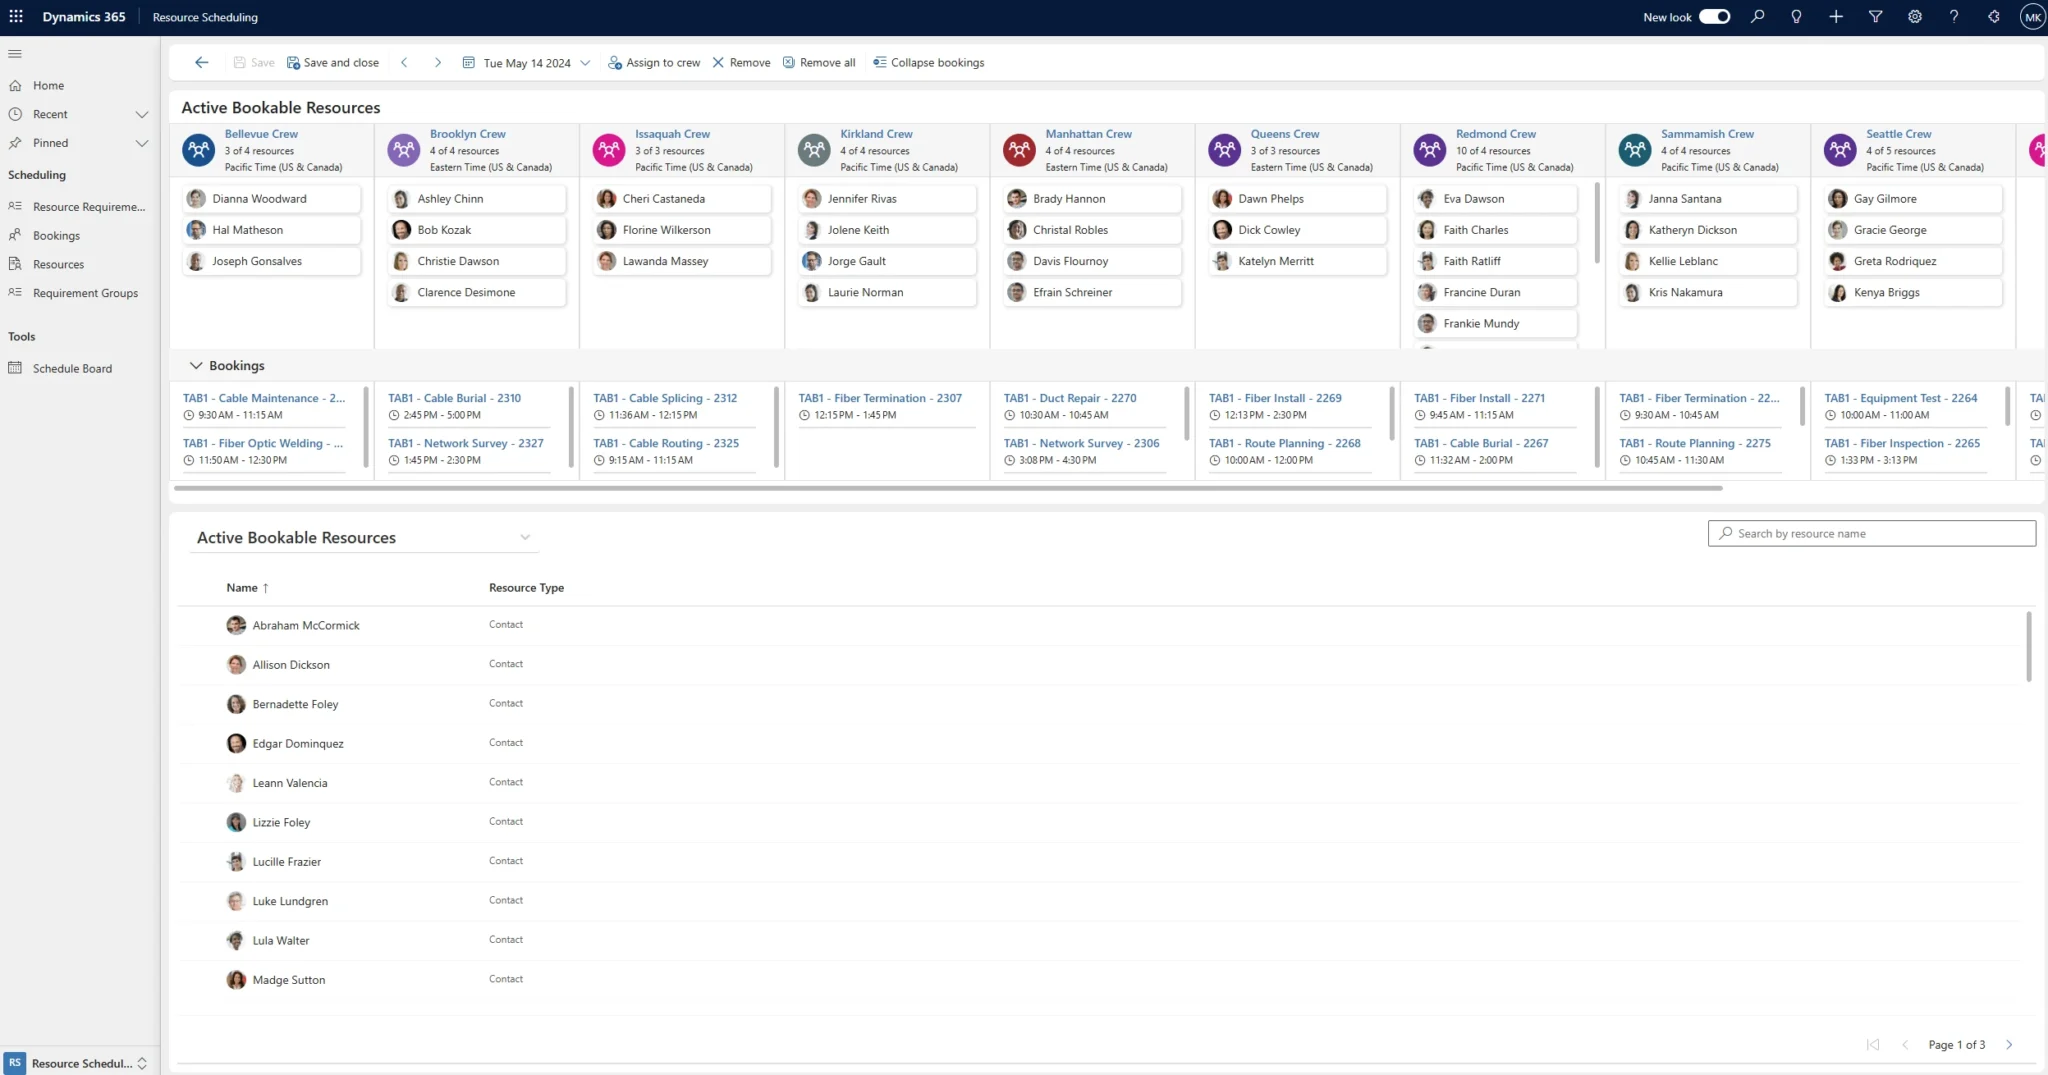 Dynamics 365 Field Service announces the new Crew Allocation Tool, which enables the “Morning Shuffle” 